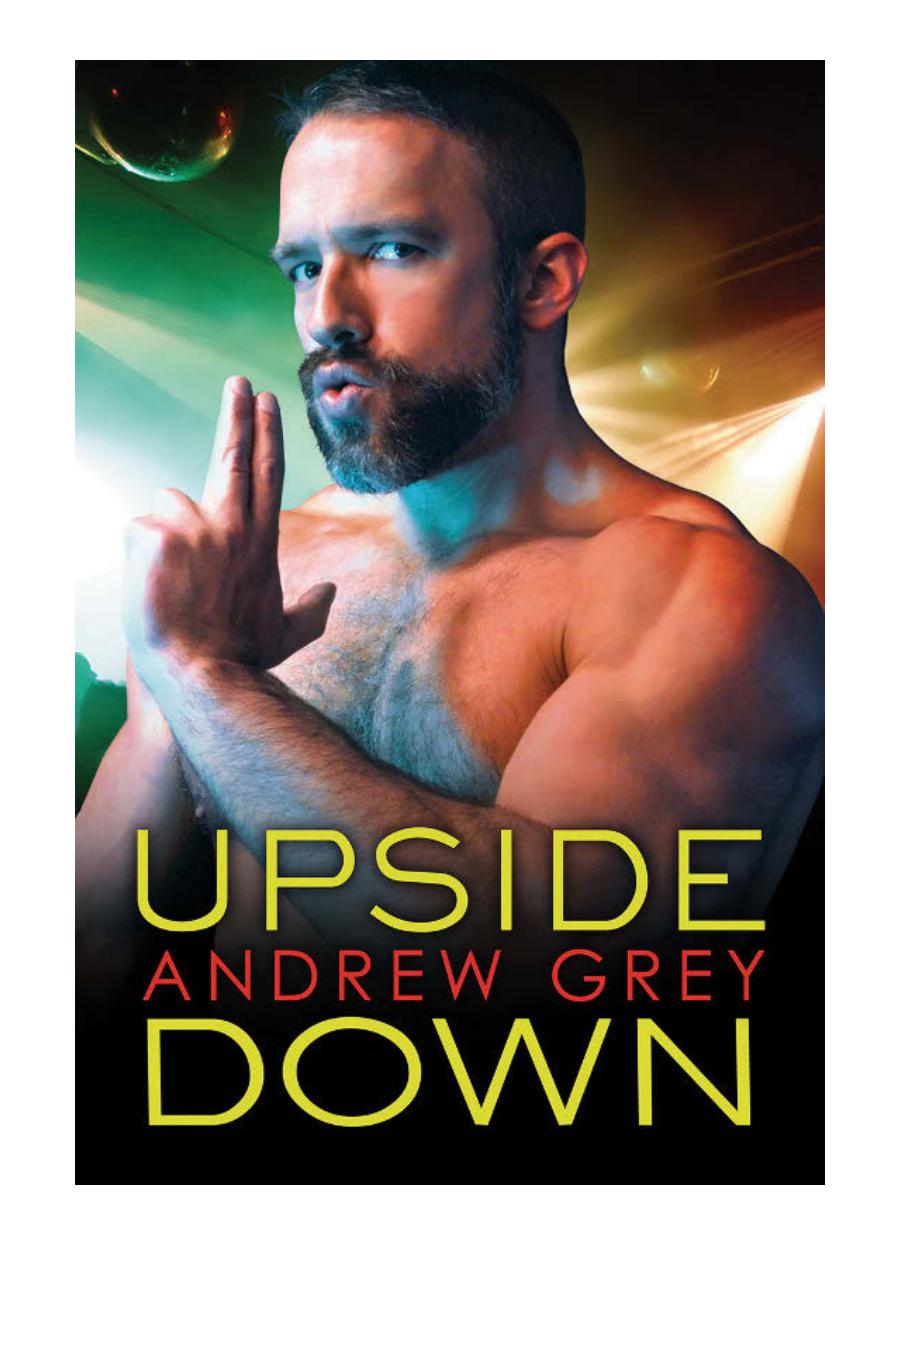 Upside Down by Andrew Grey